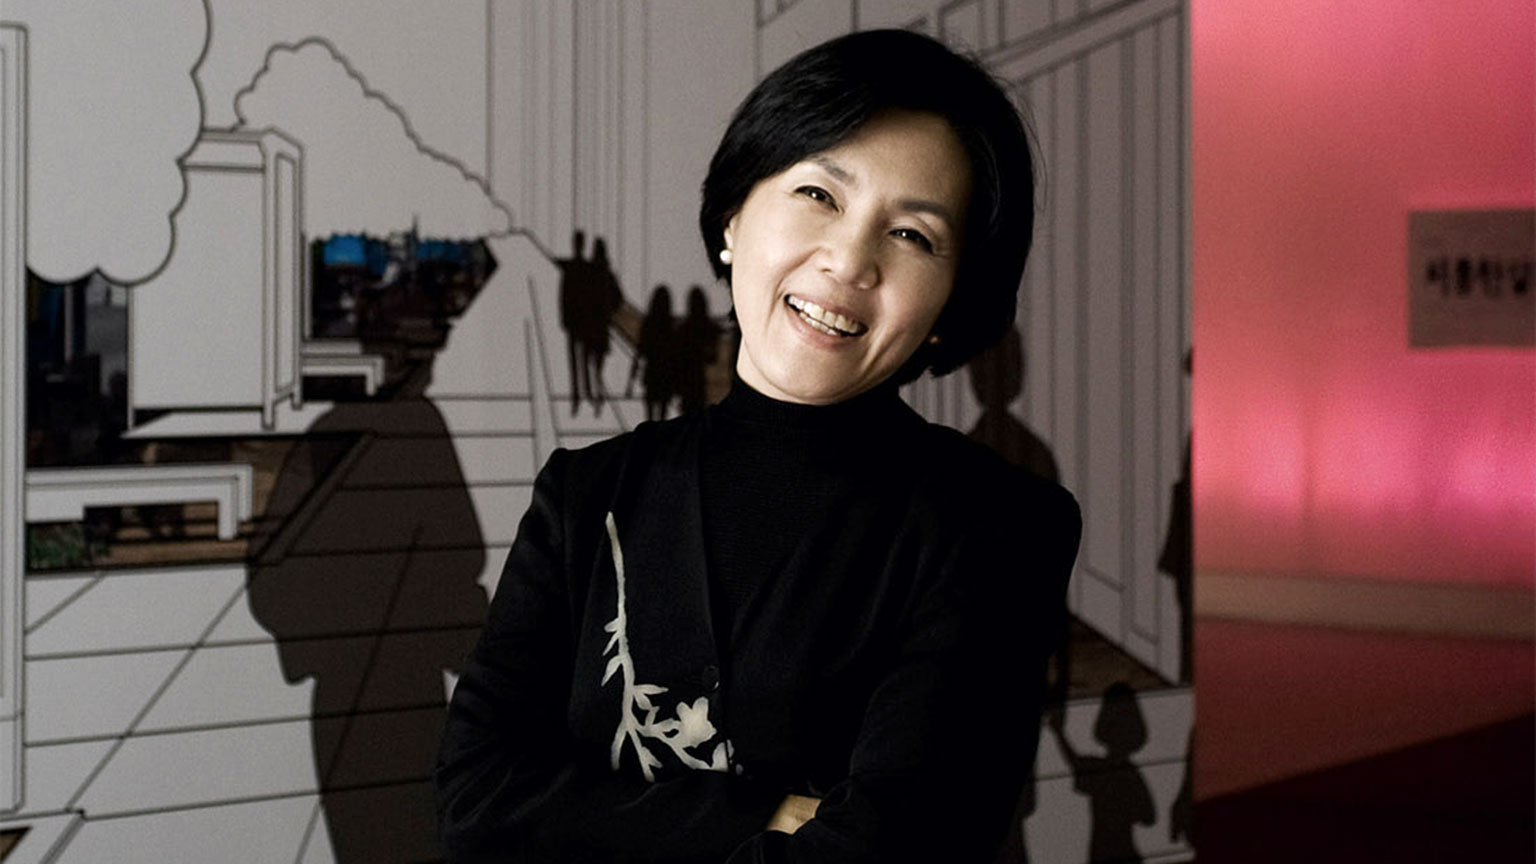 EunSook Kwon’s appointment as chair of the School of Industrial Design